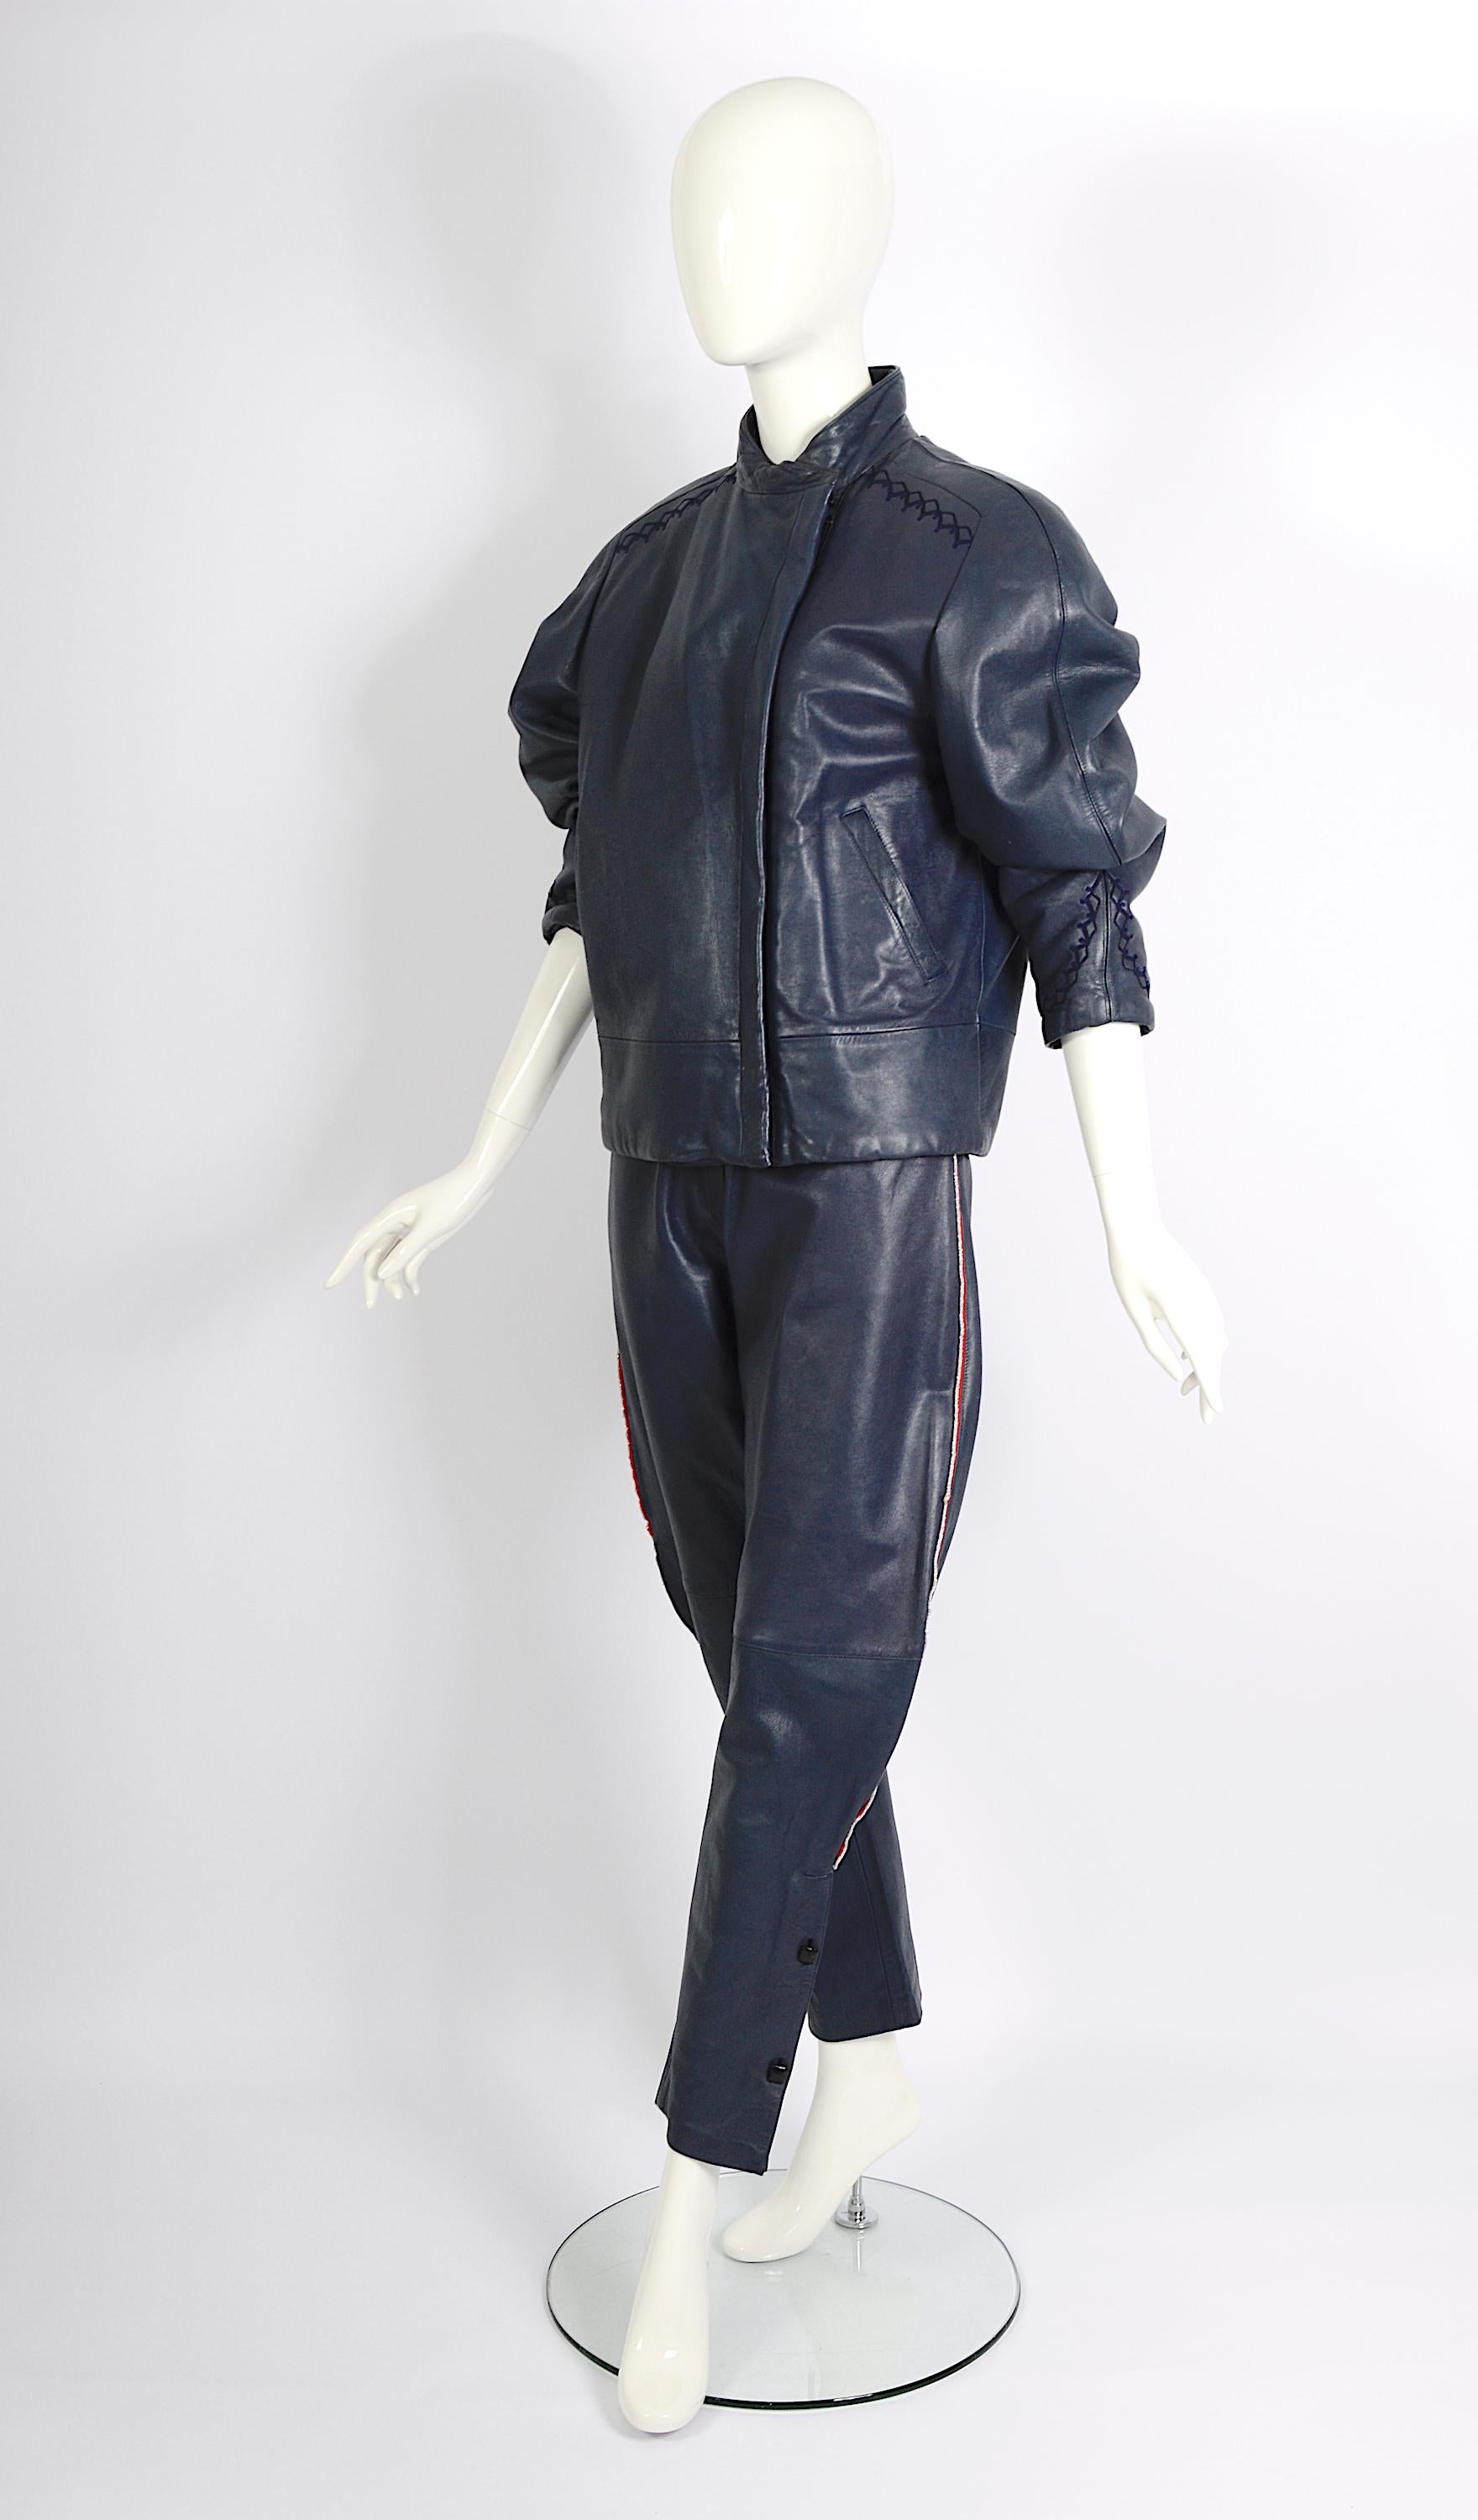 This stunning blue leather ensemble originates from Gianni Versace's iconic 1981 Fall-Winter collection, marking a pivotal moment in the fashion world. Versace's debut boutique in 1978 heralded an era of immediate popularity, propelling the brand to